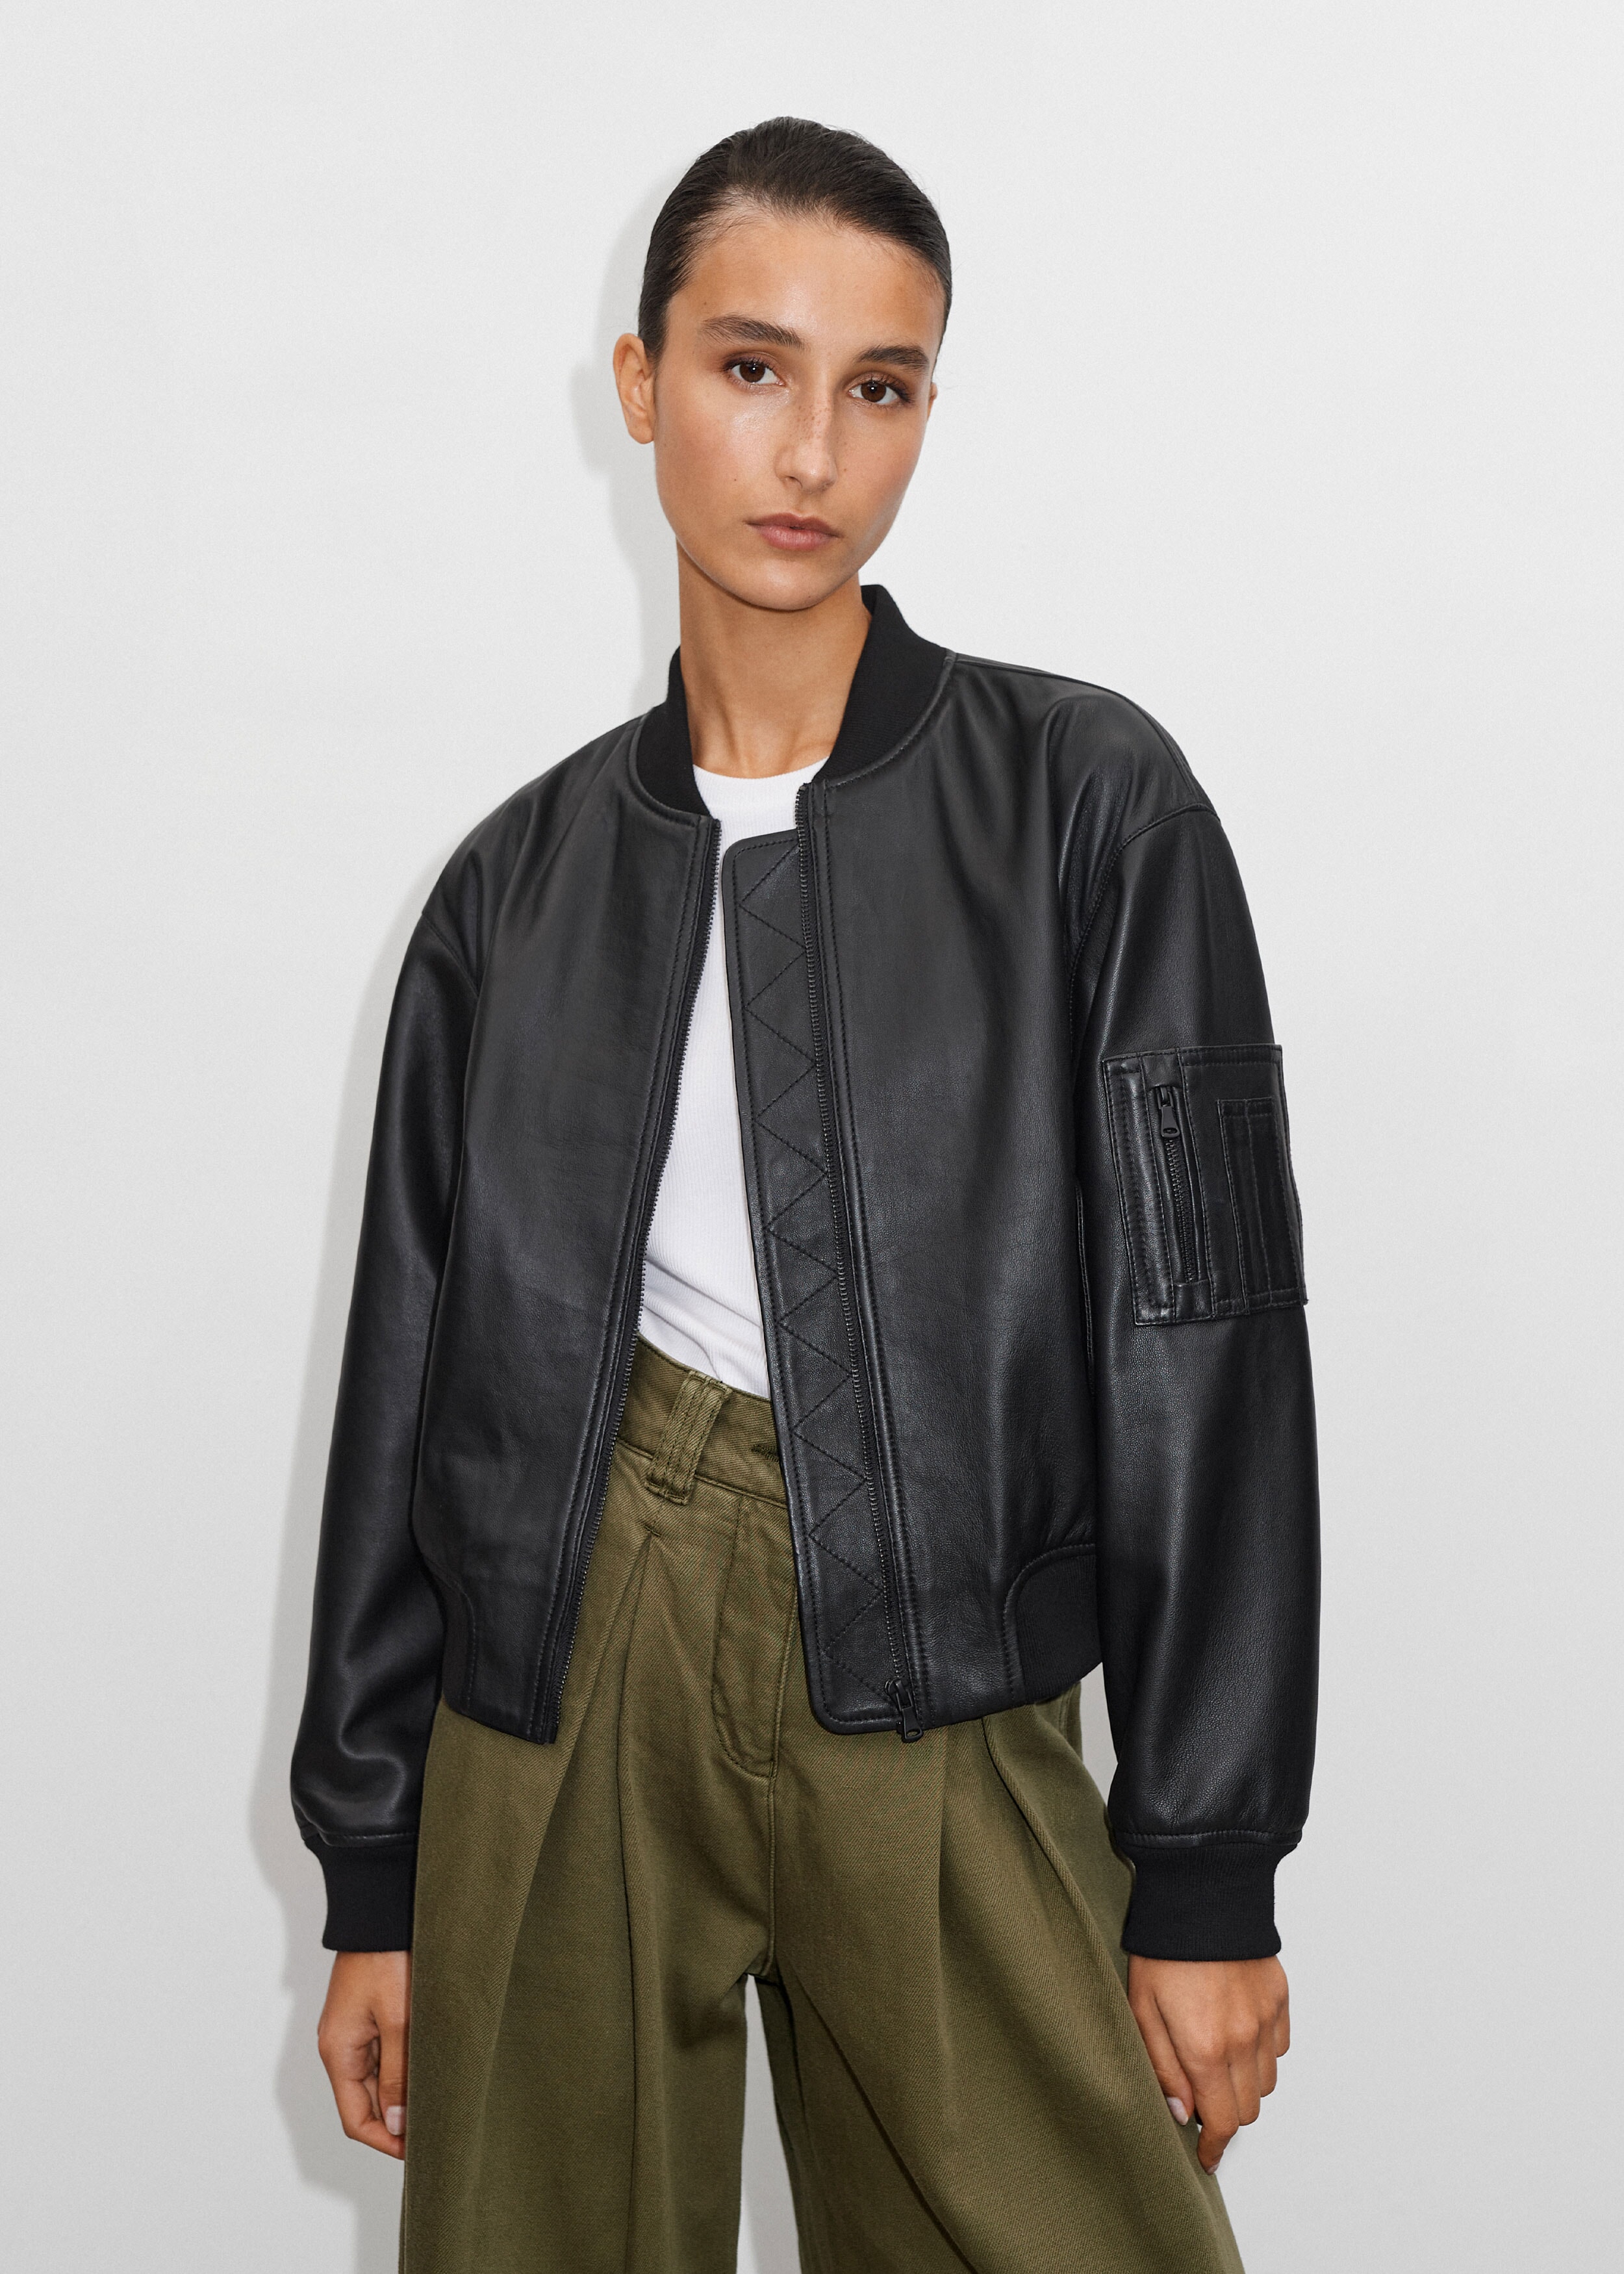 Fashion's Favourite Whistles Leather Jacket Is Back in Stock | Who What ...